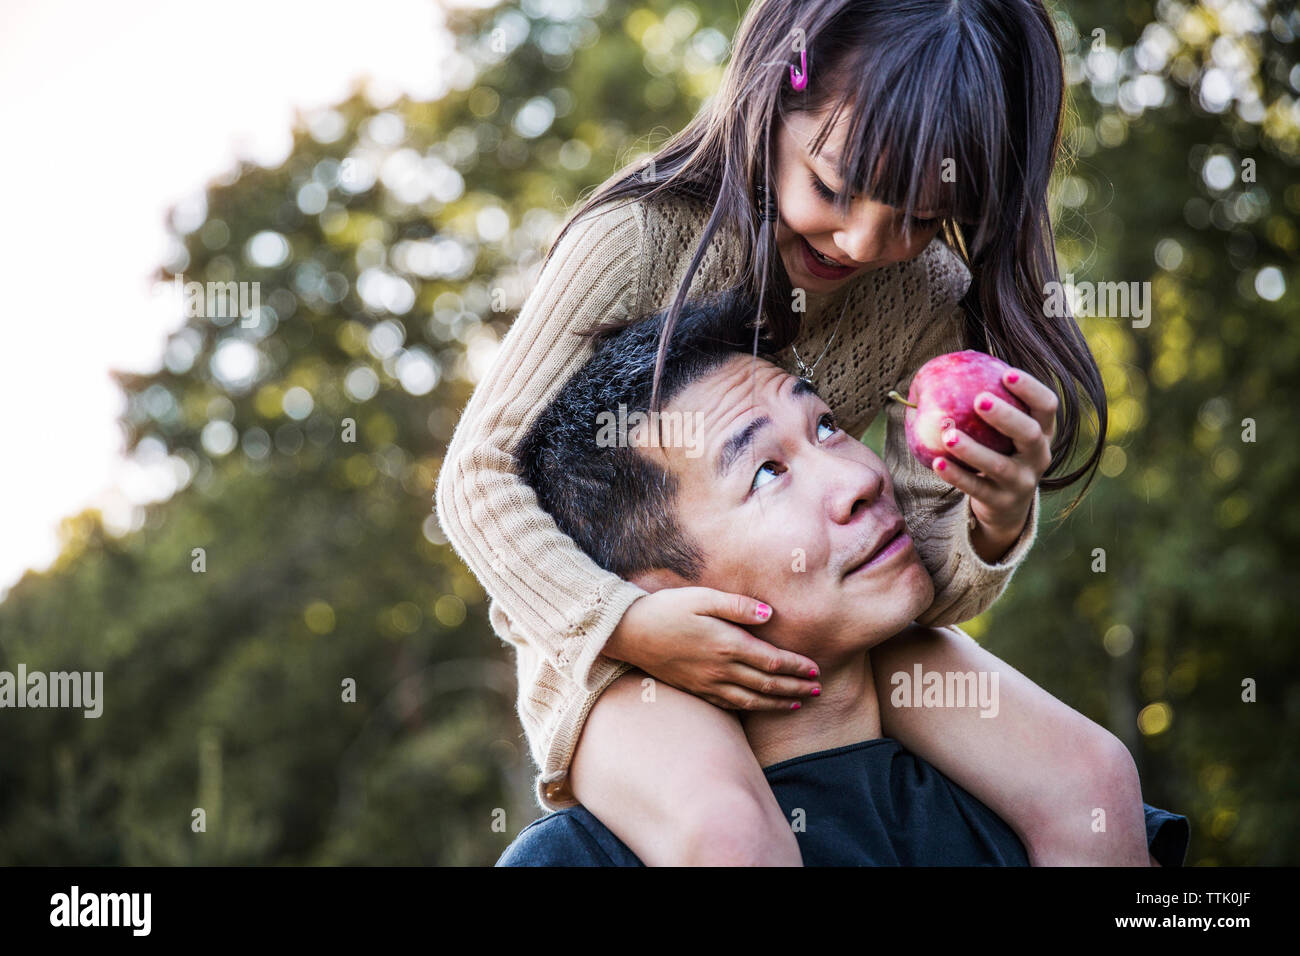 Girl sitting on father's shoulder in orchard Stock Photo